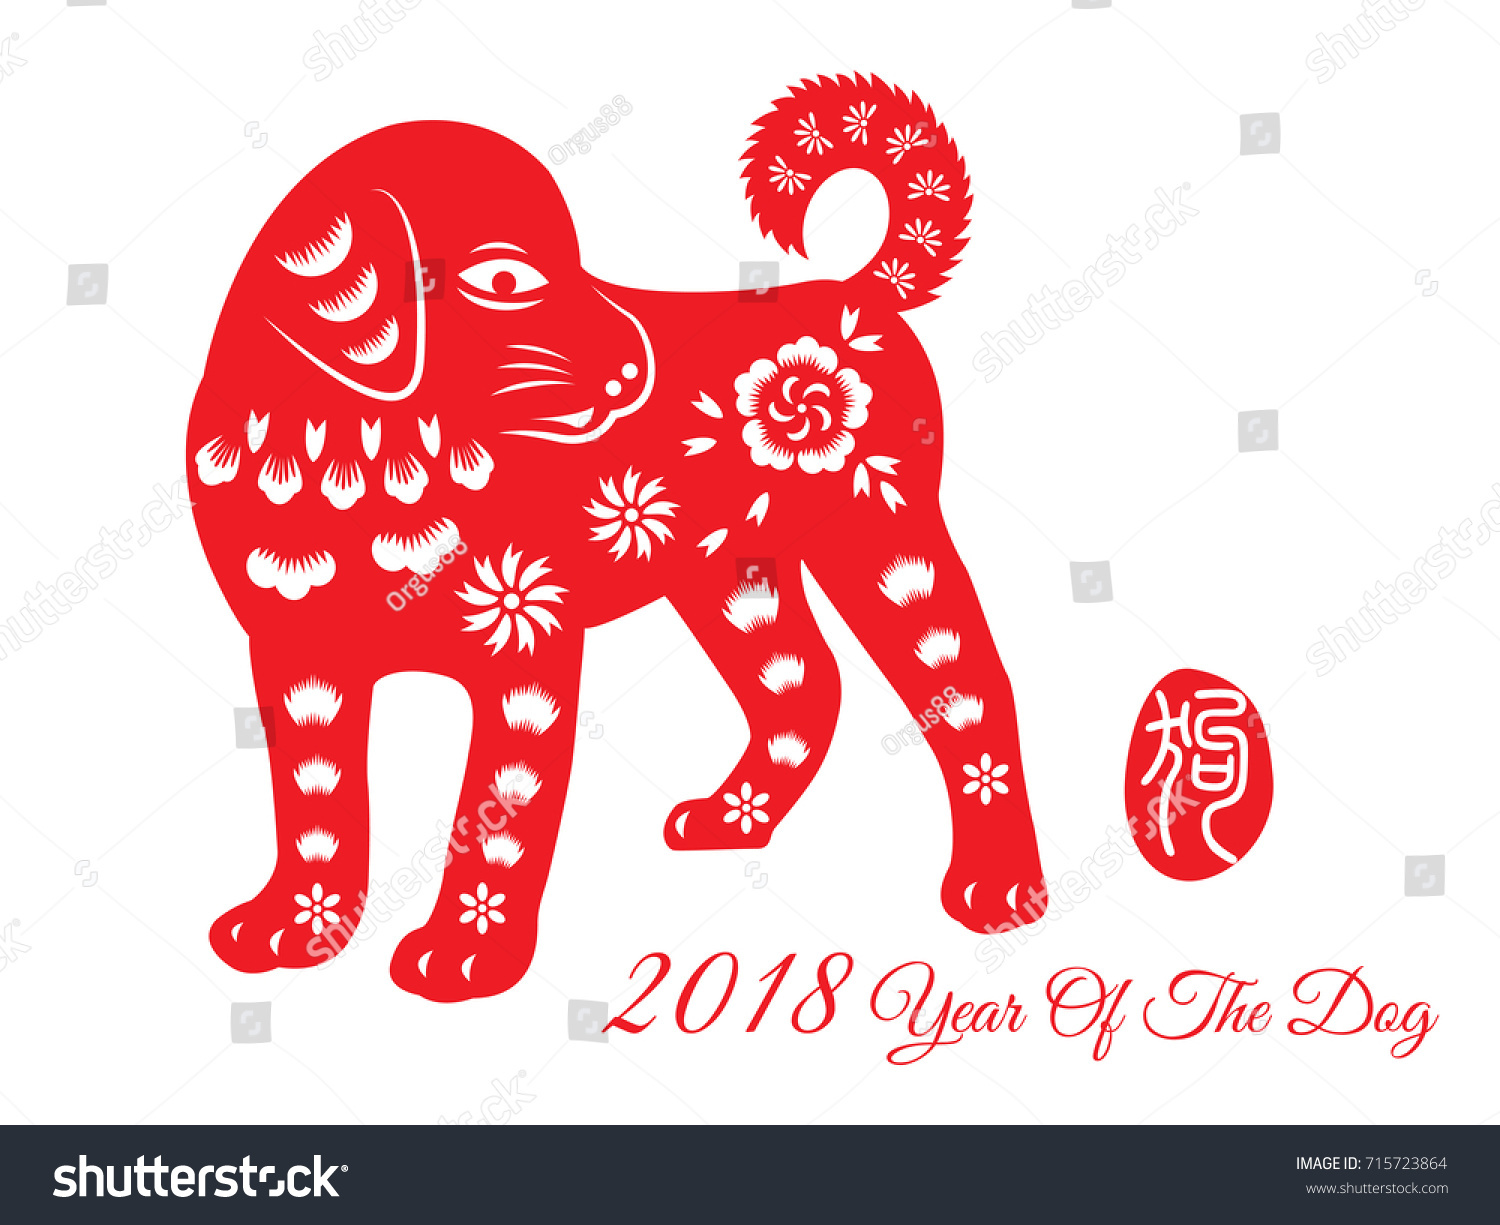 Year of The Dog, Chinese Zodiac Dog Red paper Royalty Free Stock